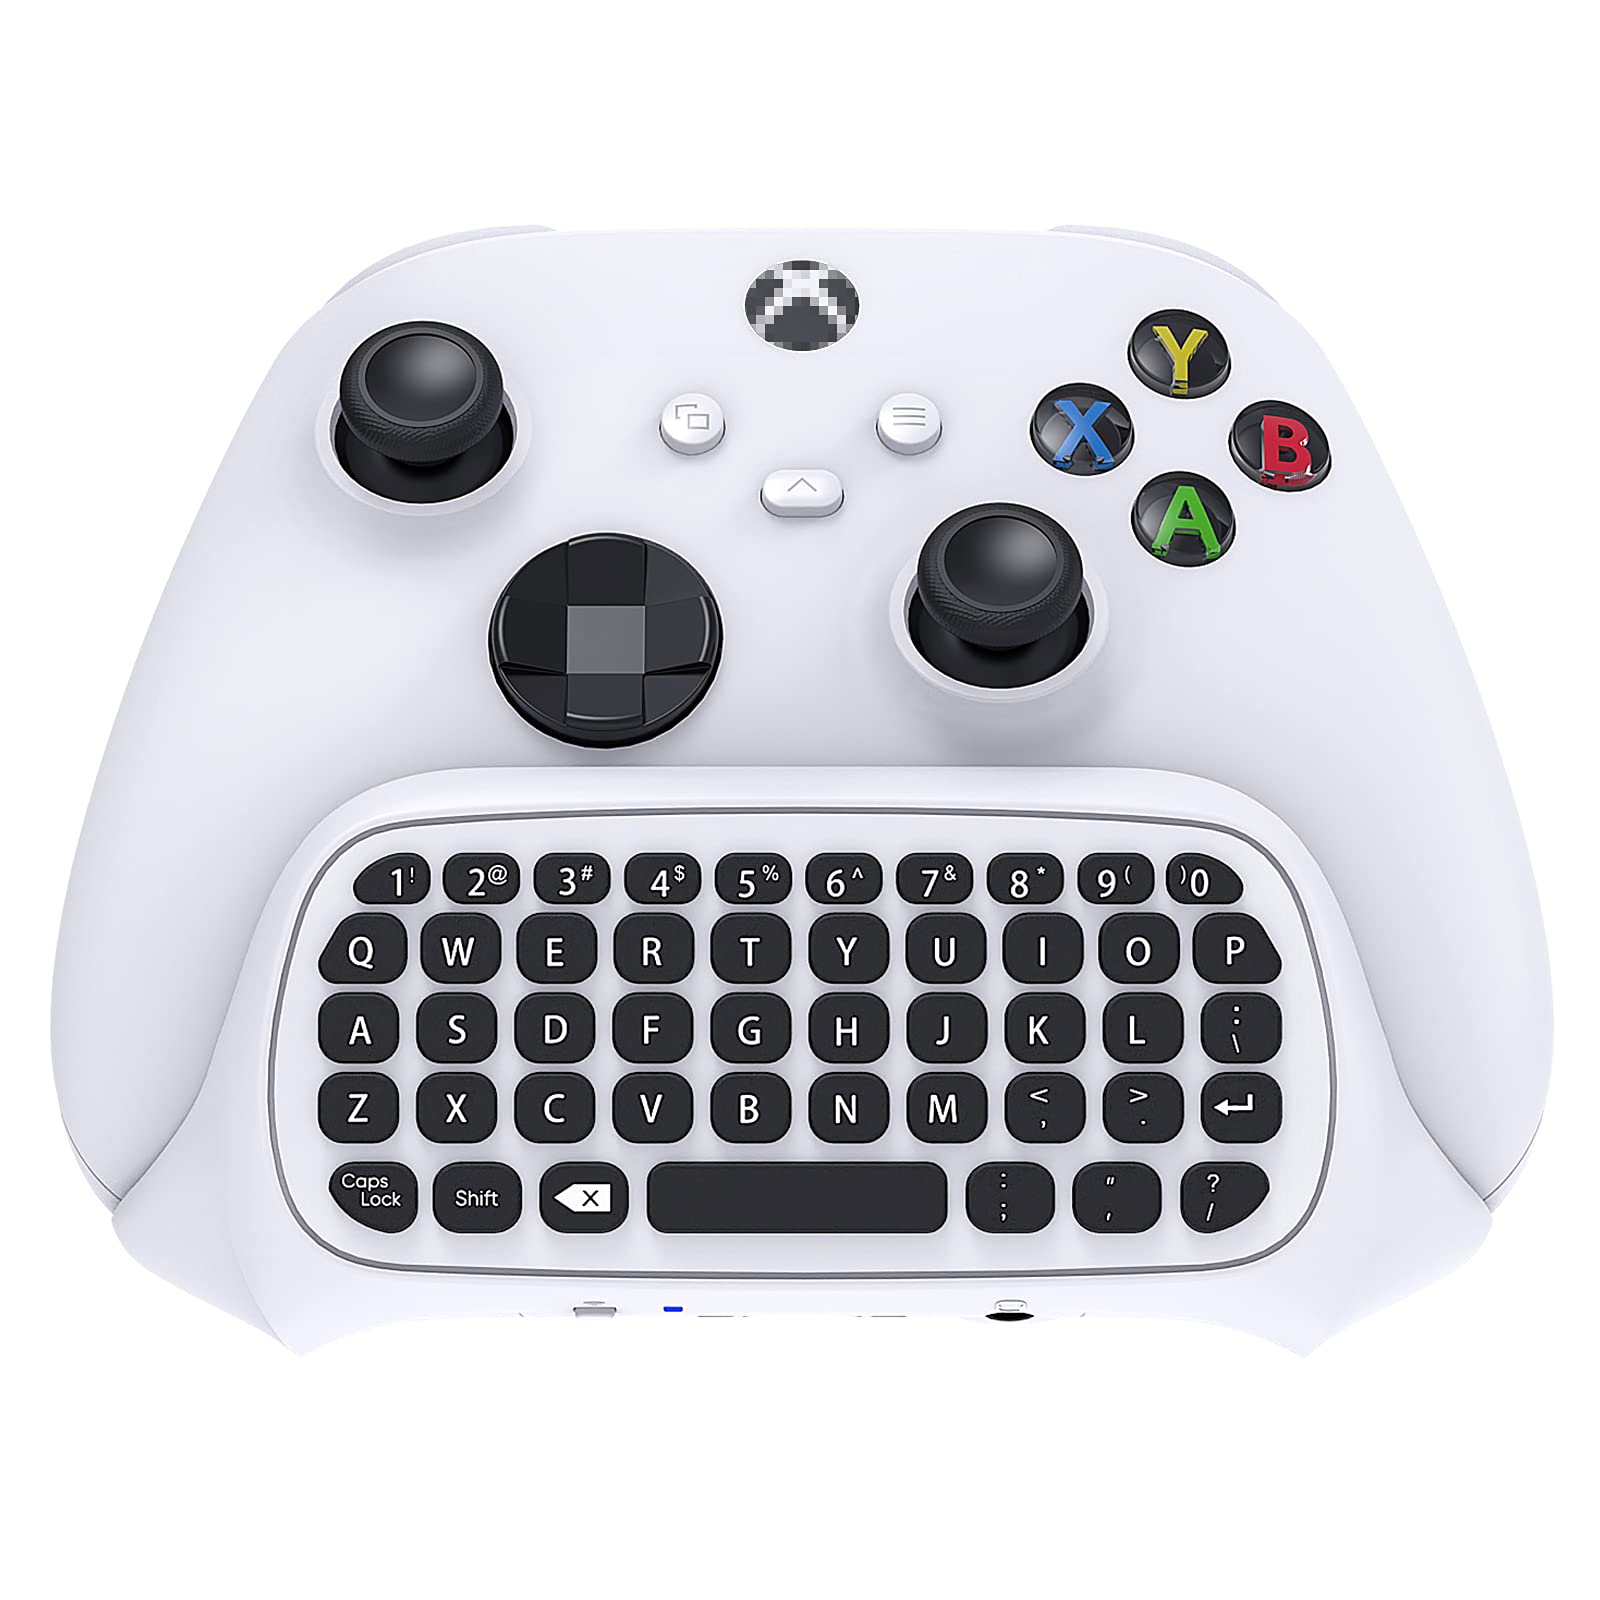 Controller Keyboard for Xbox Series XSeries SOneS Controller Gamepad 2.4Ghz Mini QWERTY Controller Keyboard Gaming Chatp